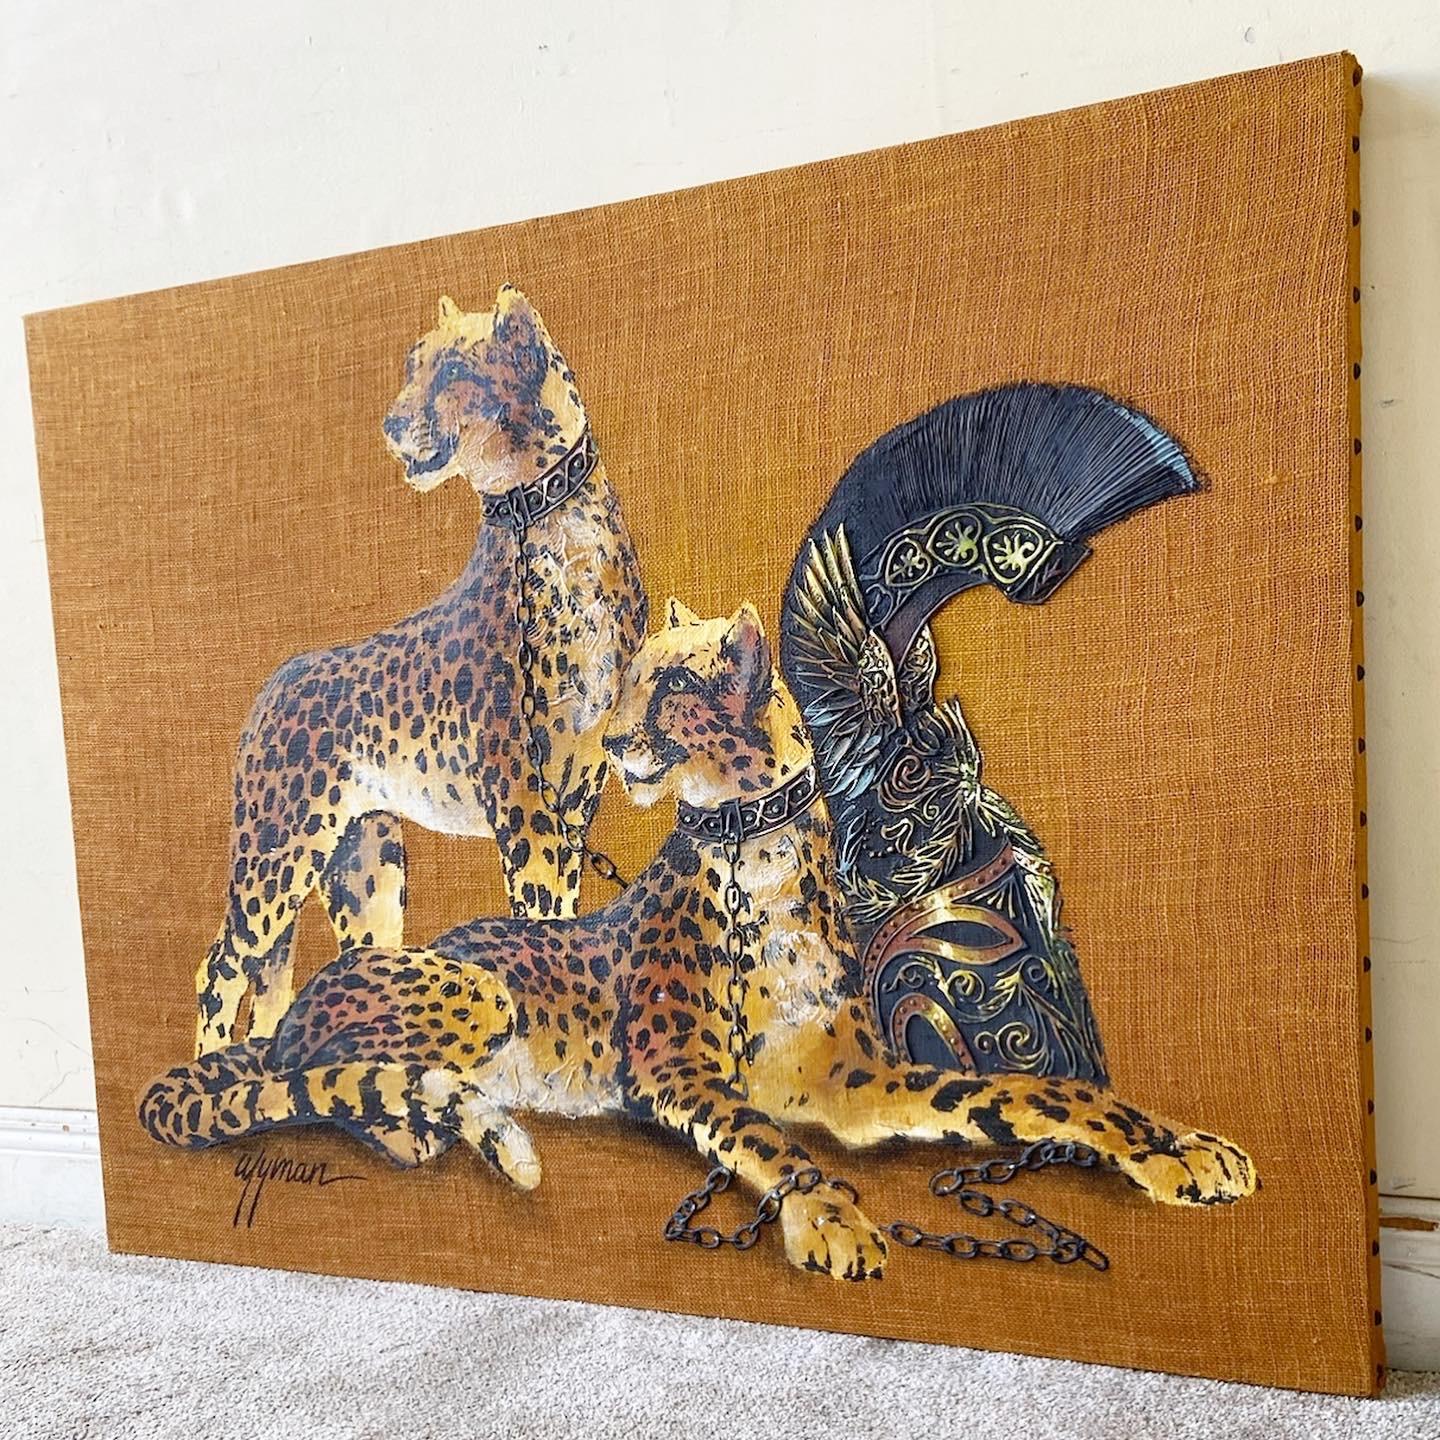 This unique vintage painting features two chained Cheetah's posing with a Roman helmet and is signed 